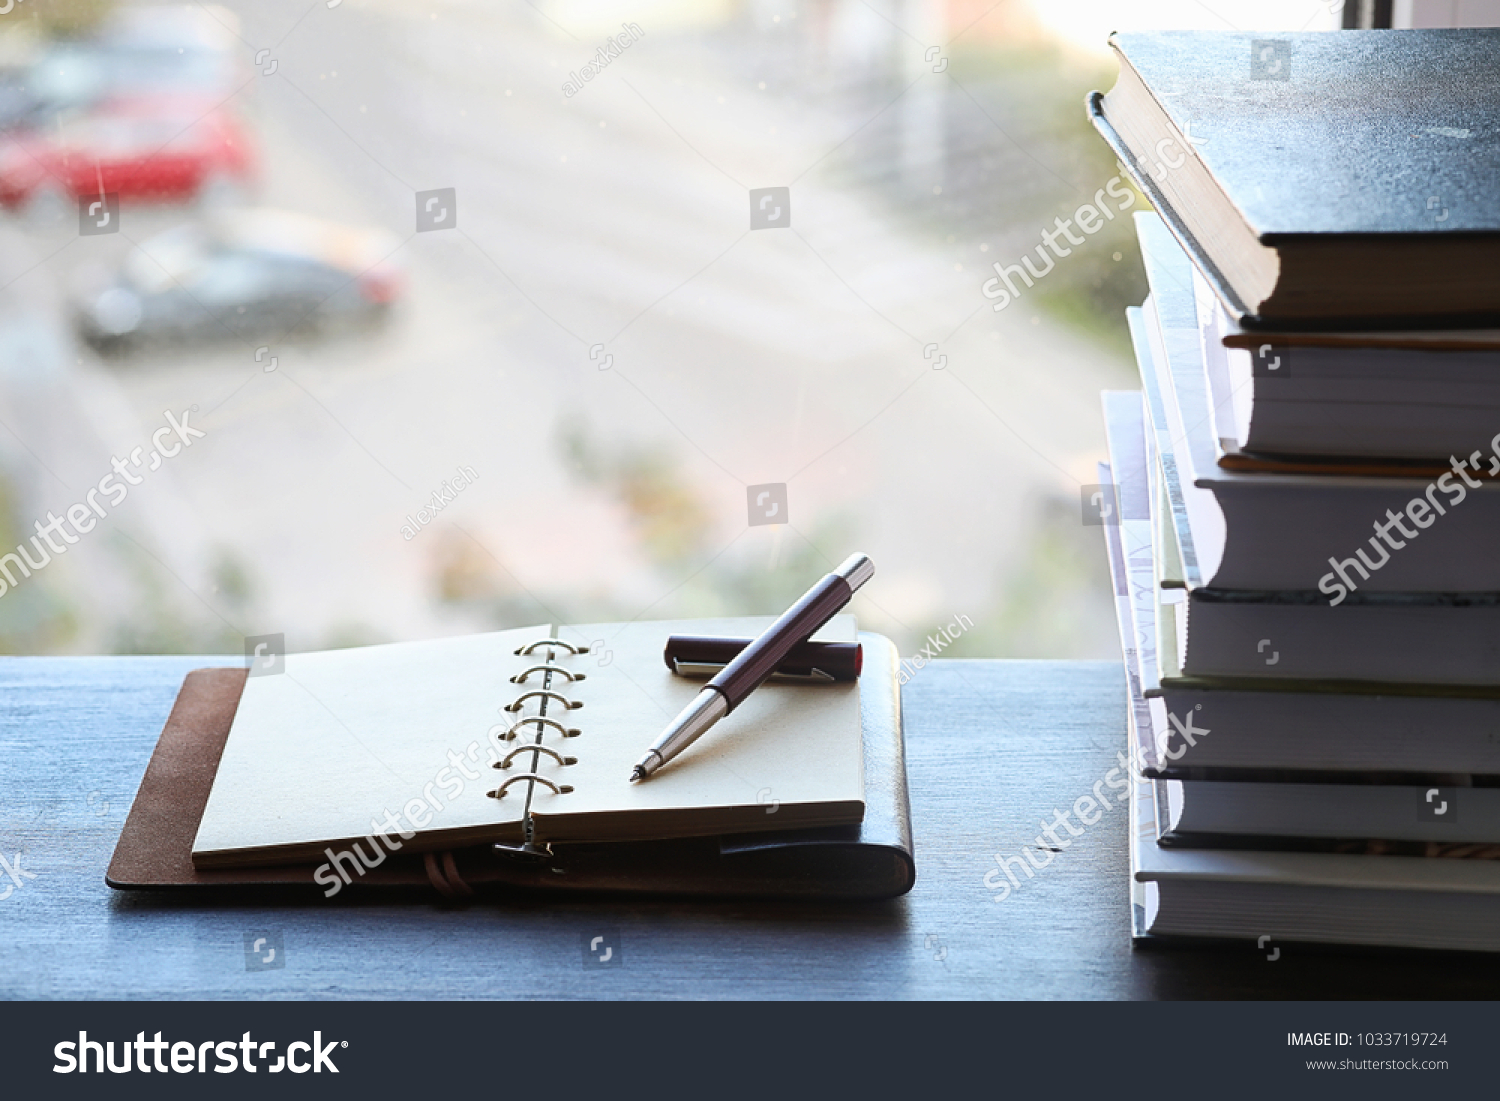 A stack of textbooks on the windowsill and writing utensils #1033719724